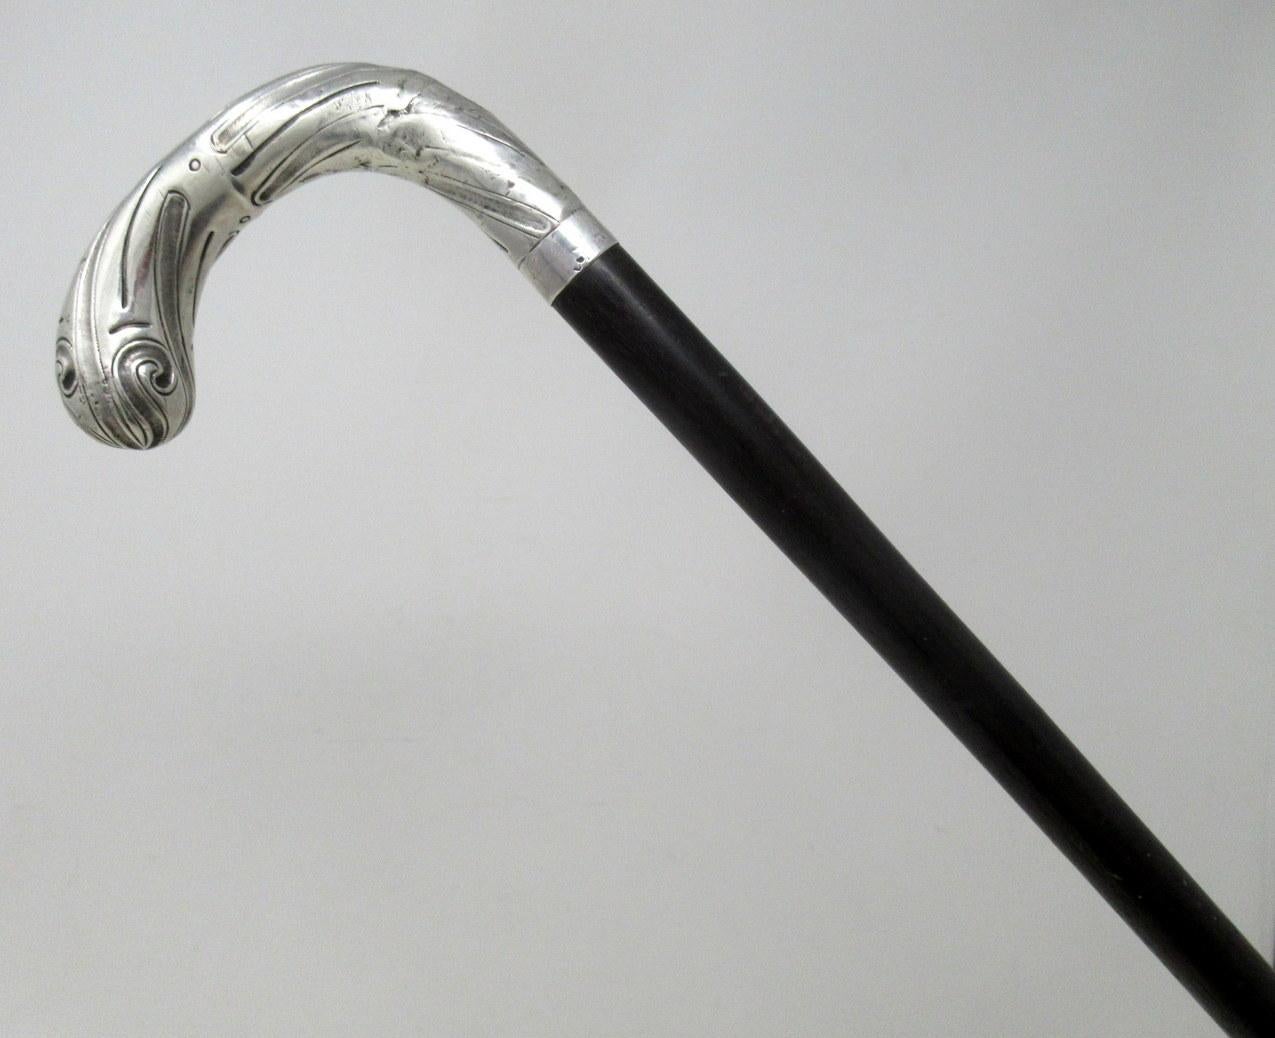 Stylish solid polished ebony and sterling silver lady’s or gentleman’s walking stick with traditional crook shaped handle, complete with its original bi-metal polished brass and steel ferrule, which is very lightly worn from use. Late nineteenth,